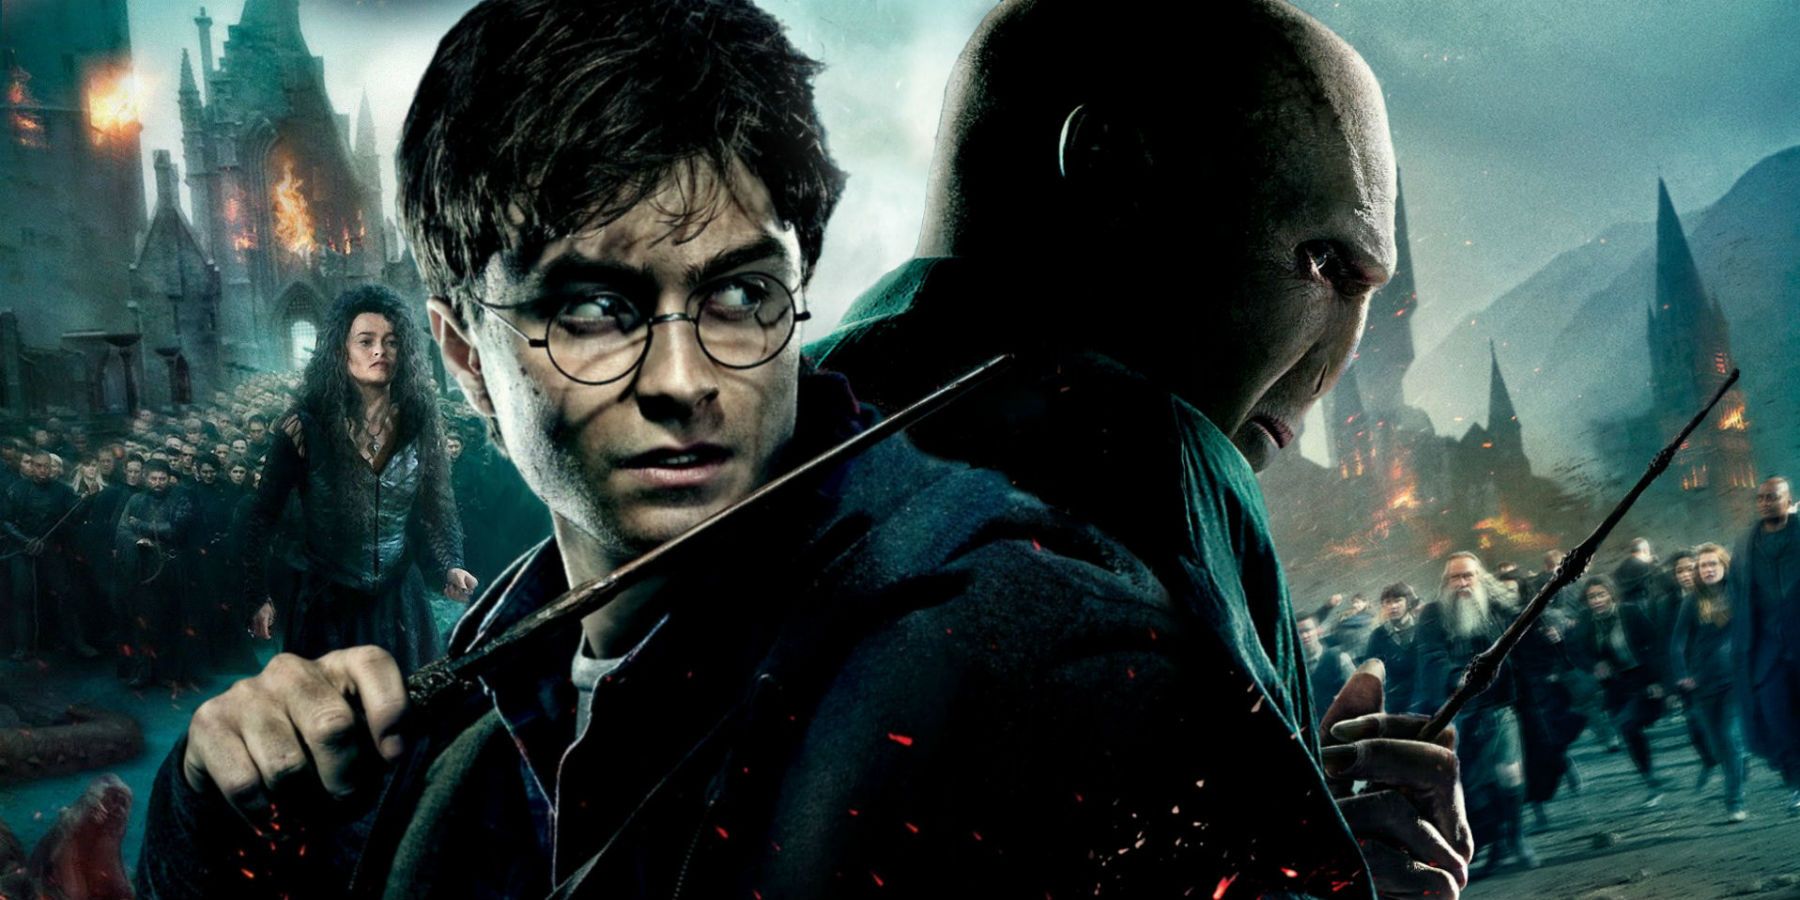 VIDEO: 20 Most Powerful Witches & Wizards In Harry Potter